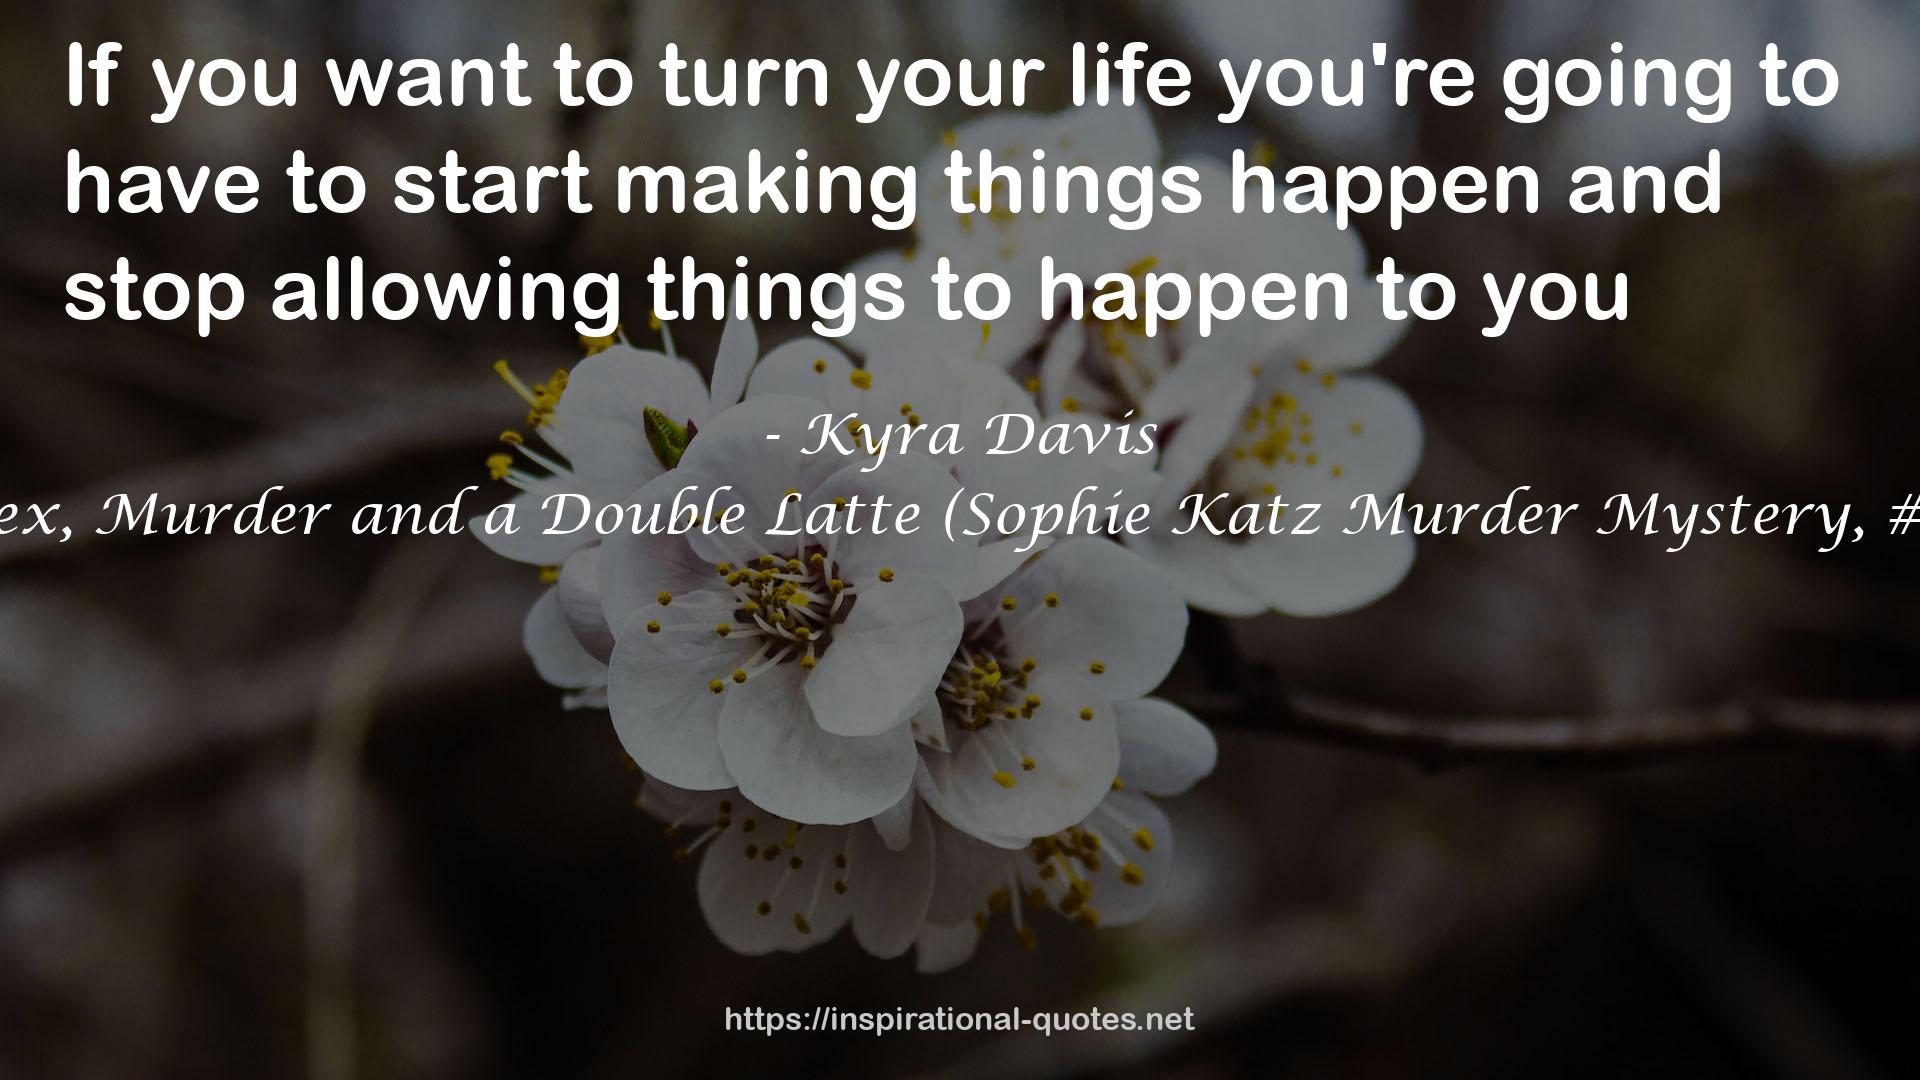 Sex, Murder and a Double Latte (Sophie Katz Murder Mystery, #1) QUOTES